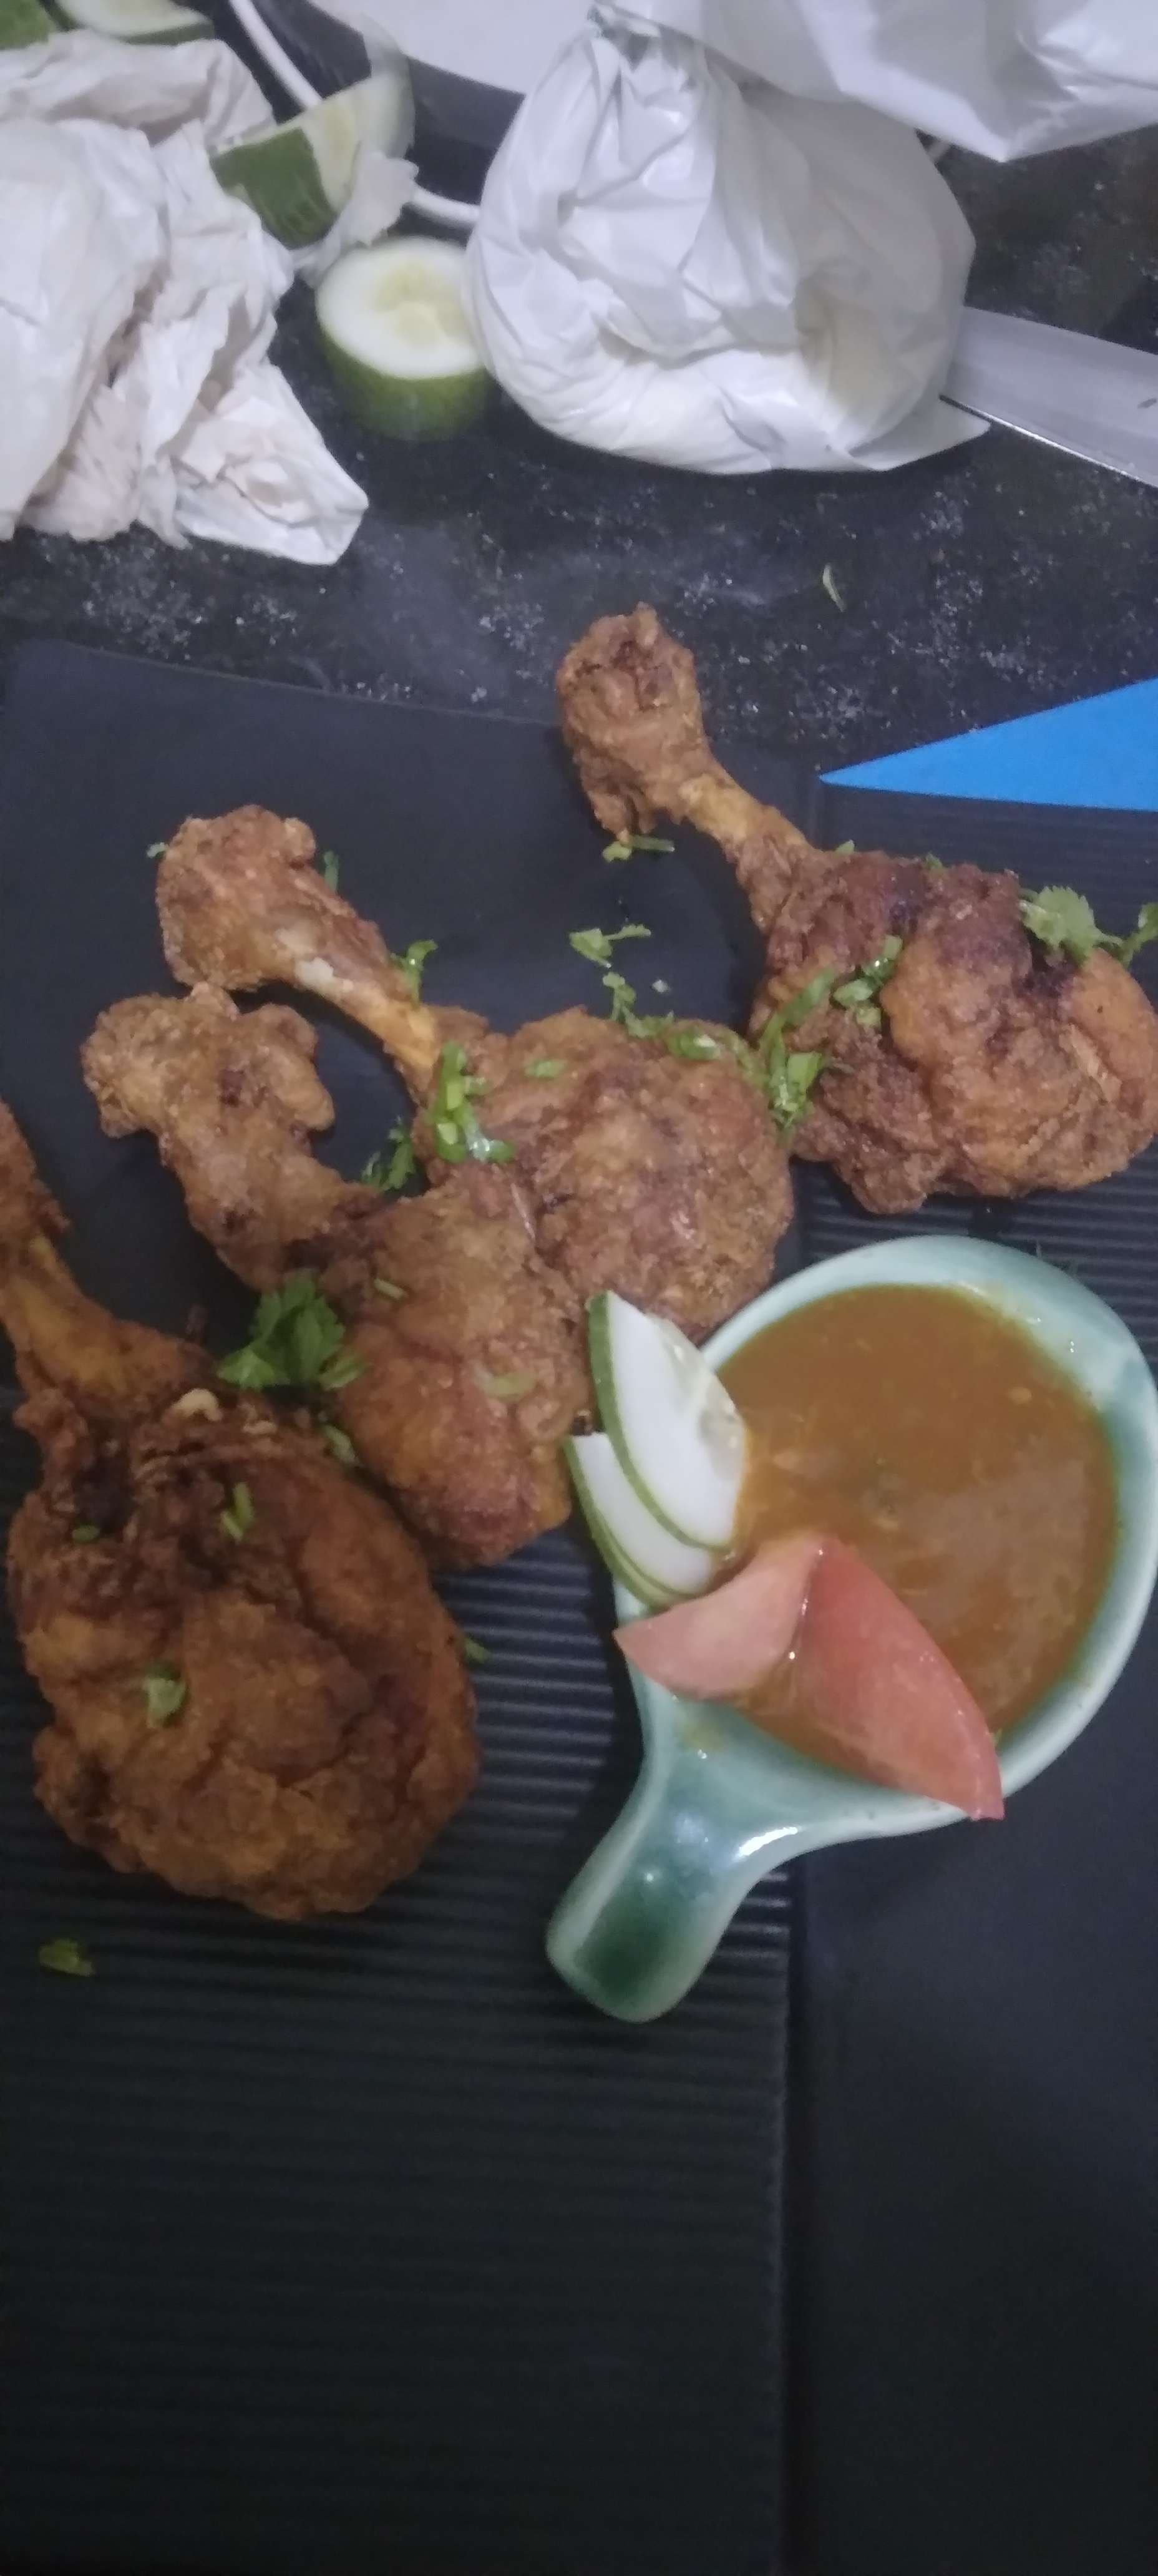 Tasty Chicken Lollipop cooked by COOX chefs cooks during occasions parties events at home